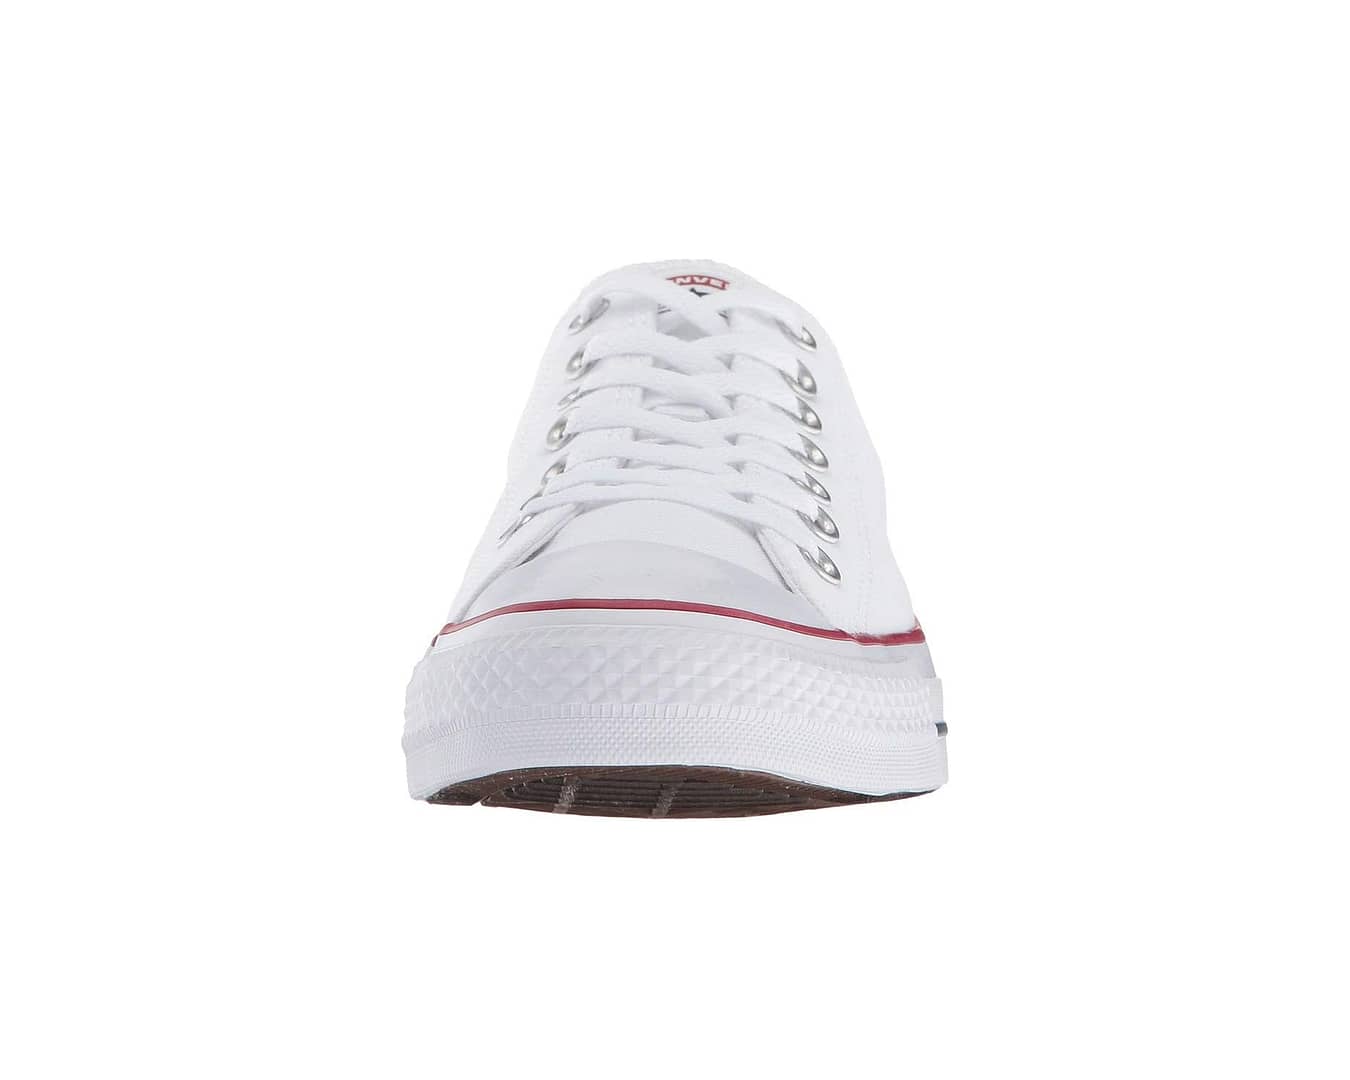 Converse Men's Chuck Taylor All Star Sneakers - High Top